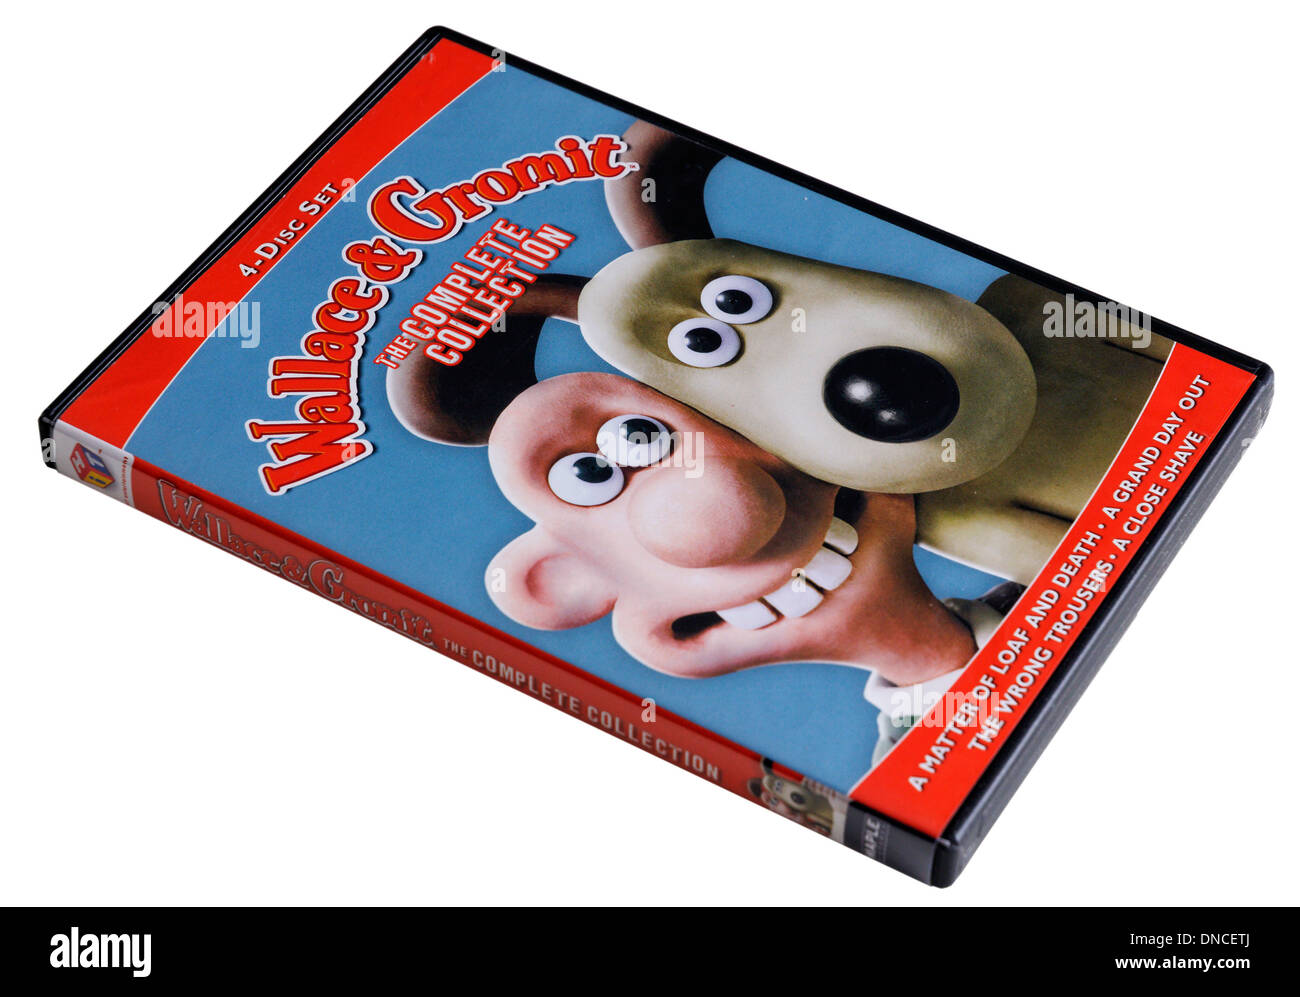 Wallace and Gromit DVD Stock Photo - Alamy